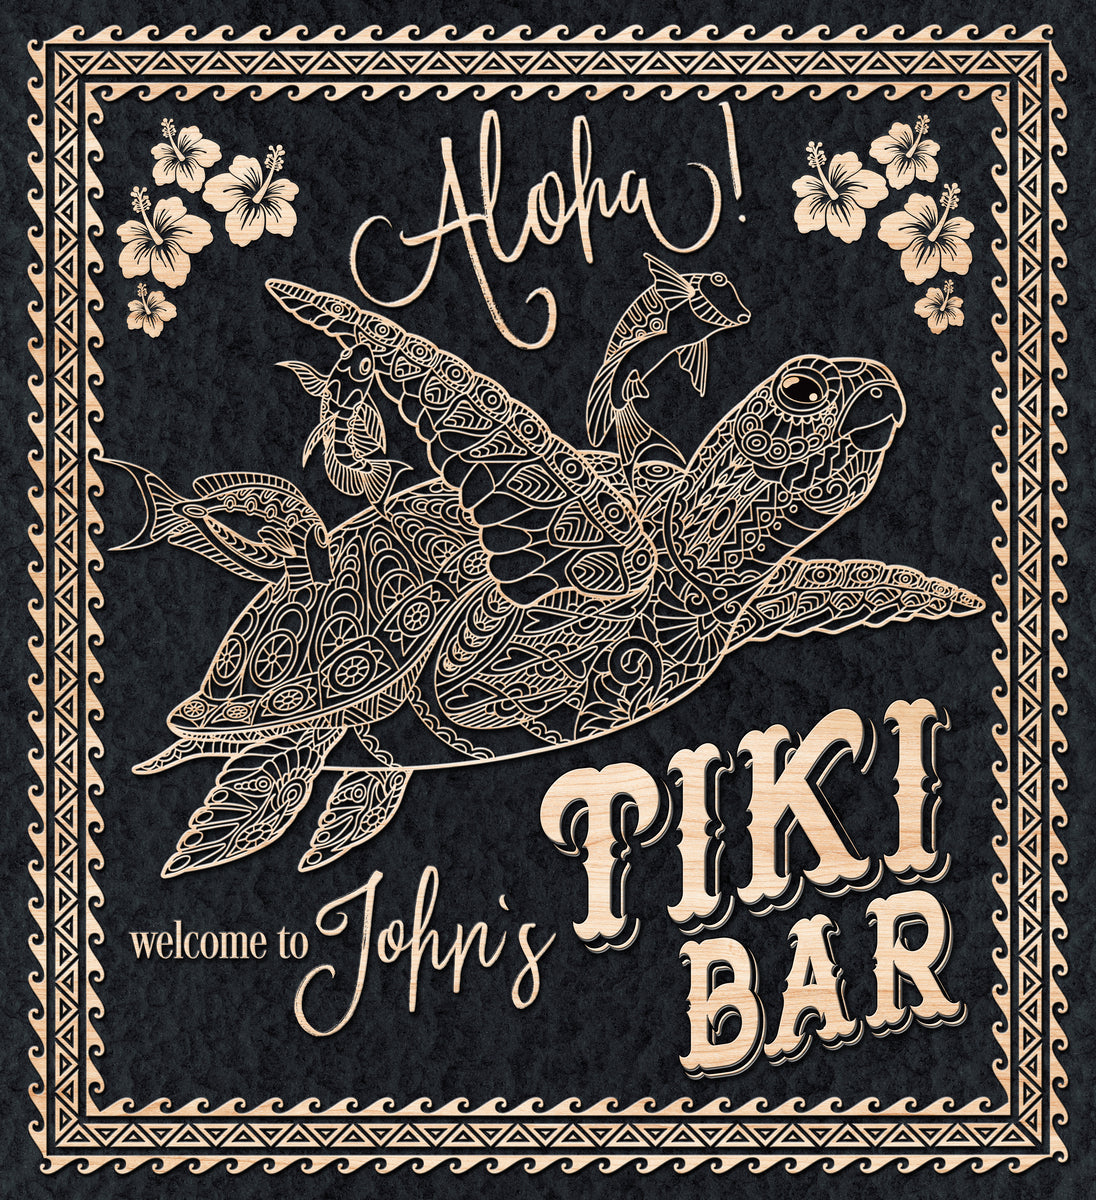 Tiki Bar sign ready to hang on black textured tailored canvas with words; Aloha, Welcome to John's Tiki Bar in teak wood.